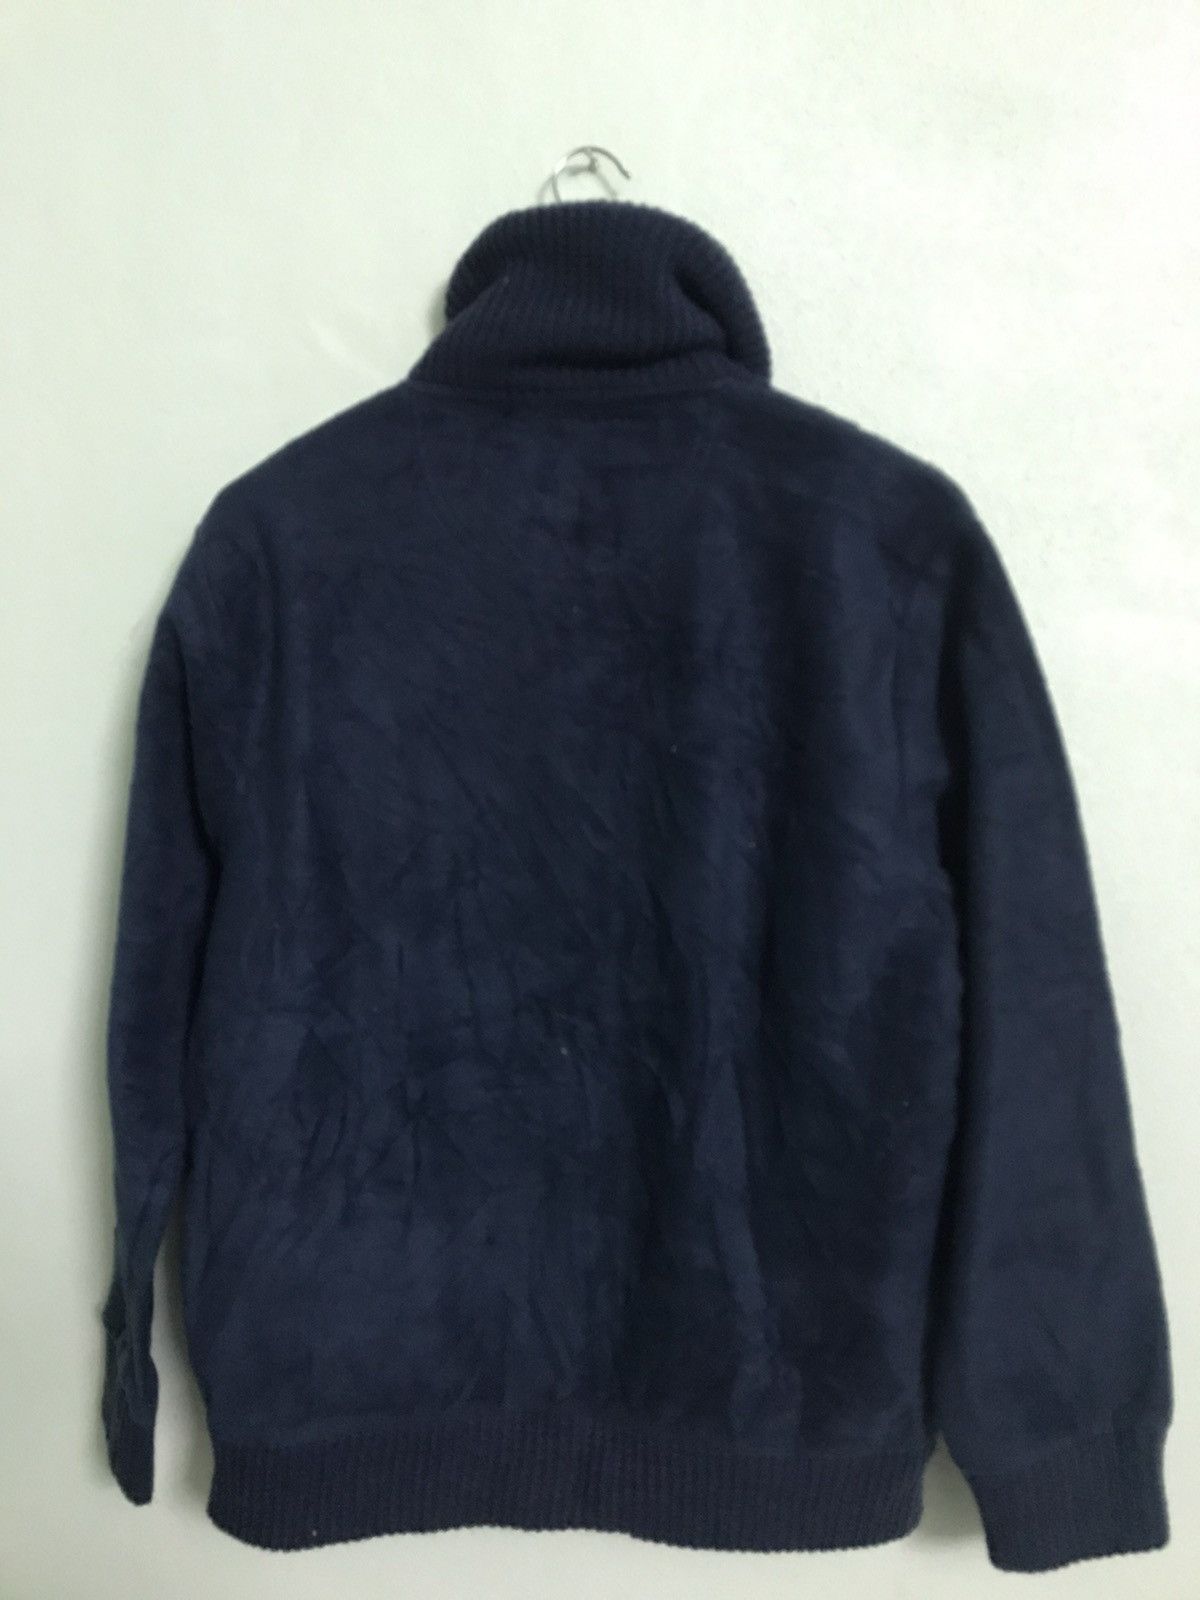 Japanese Brand - Practical cable knit fleece jacket - gh0220 - 3